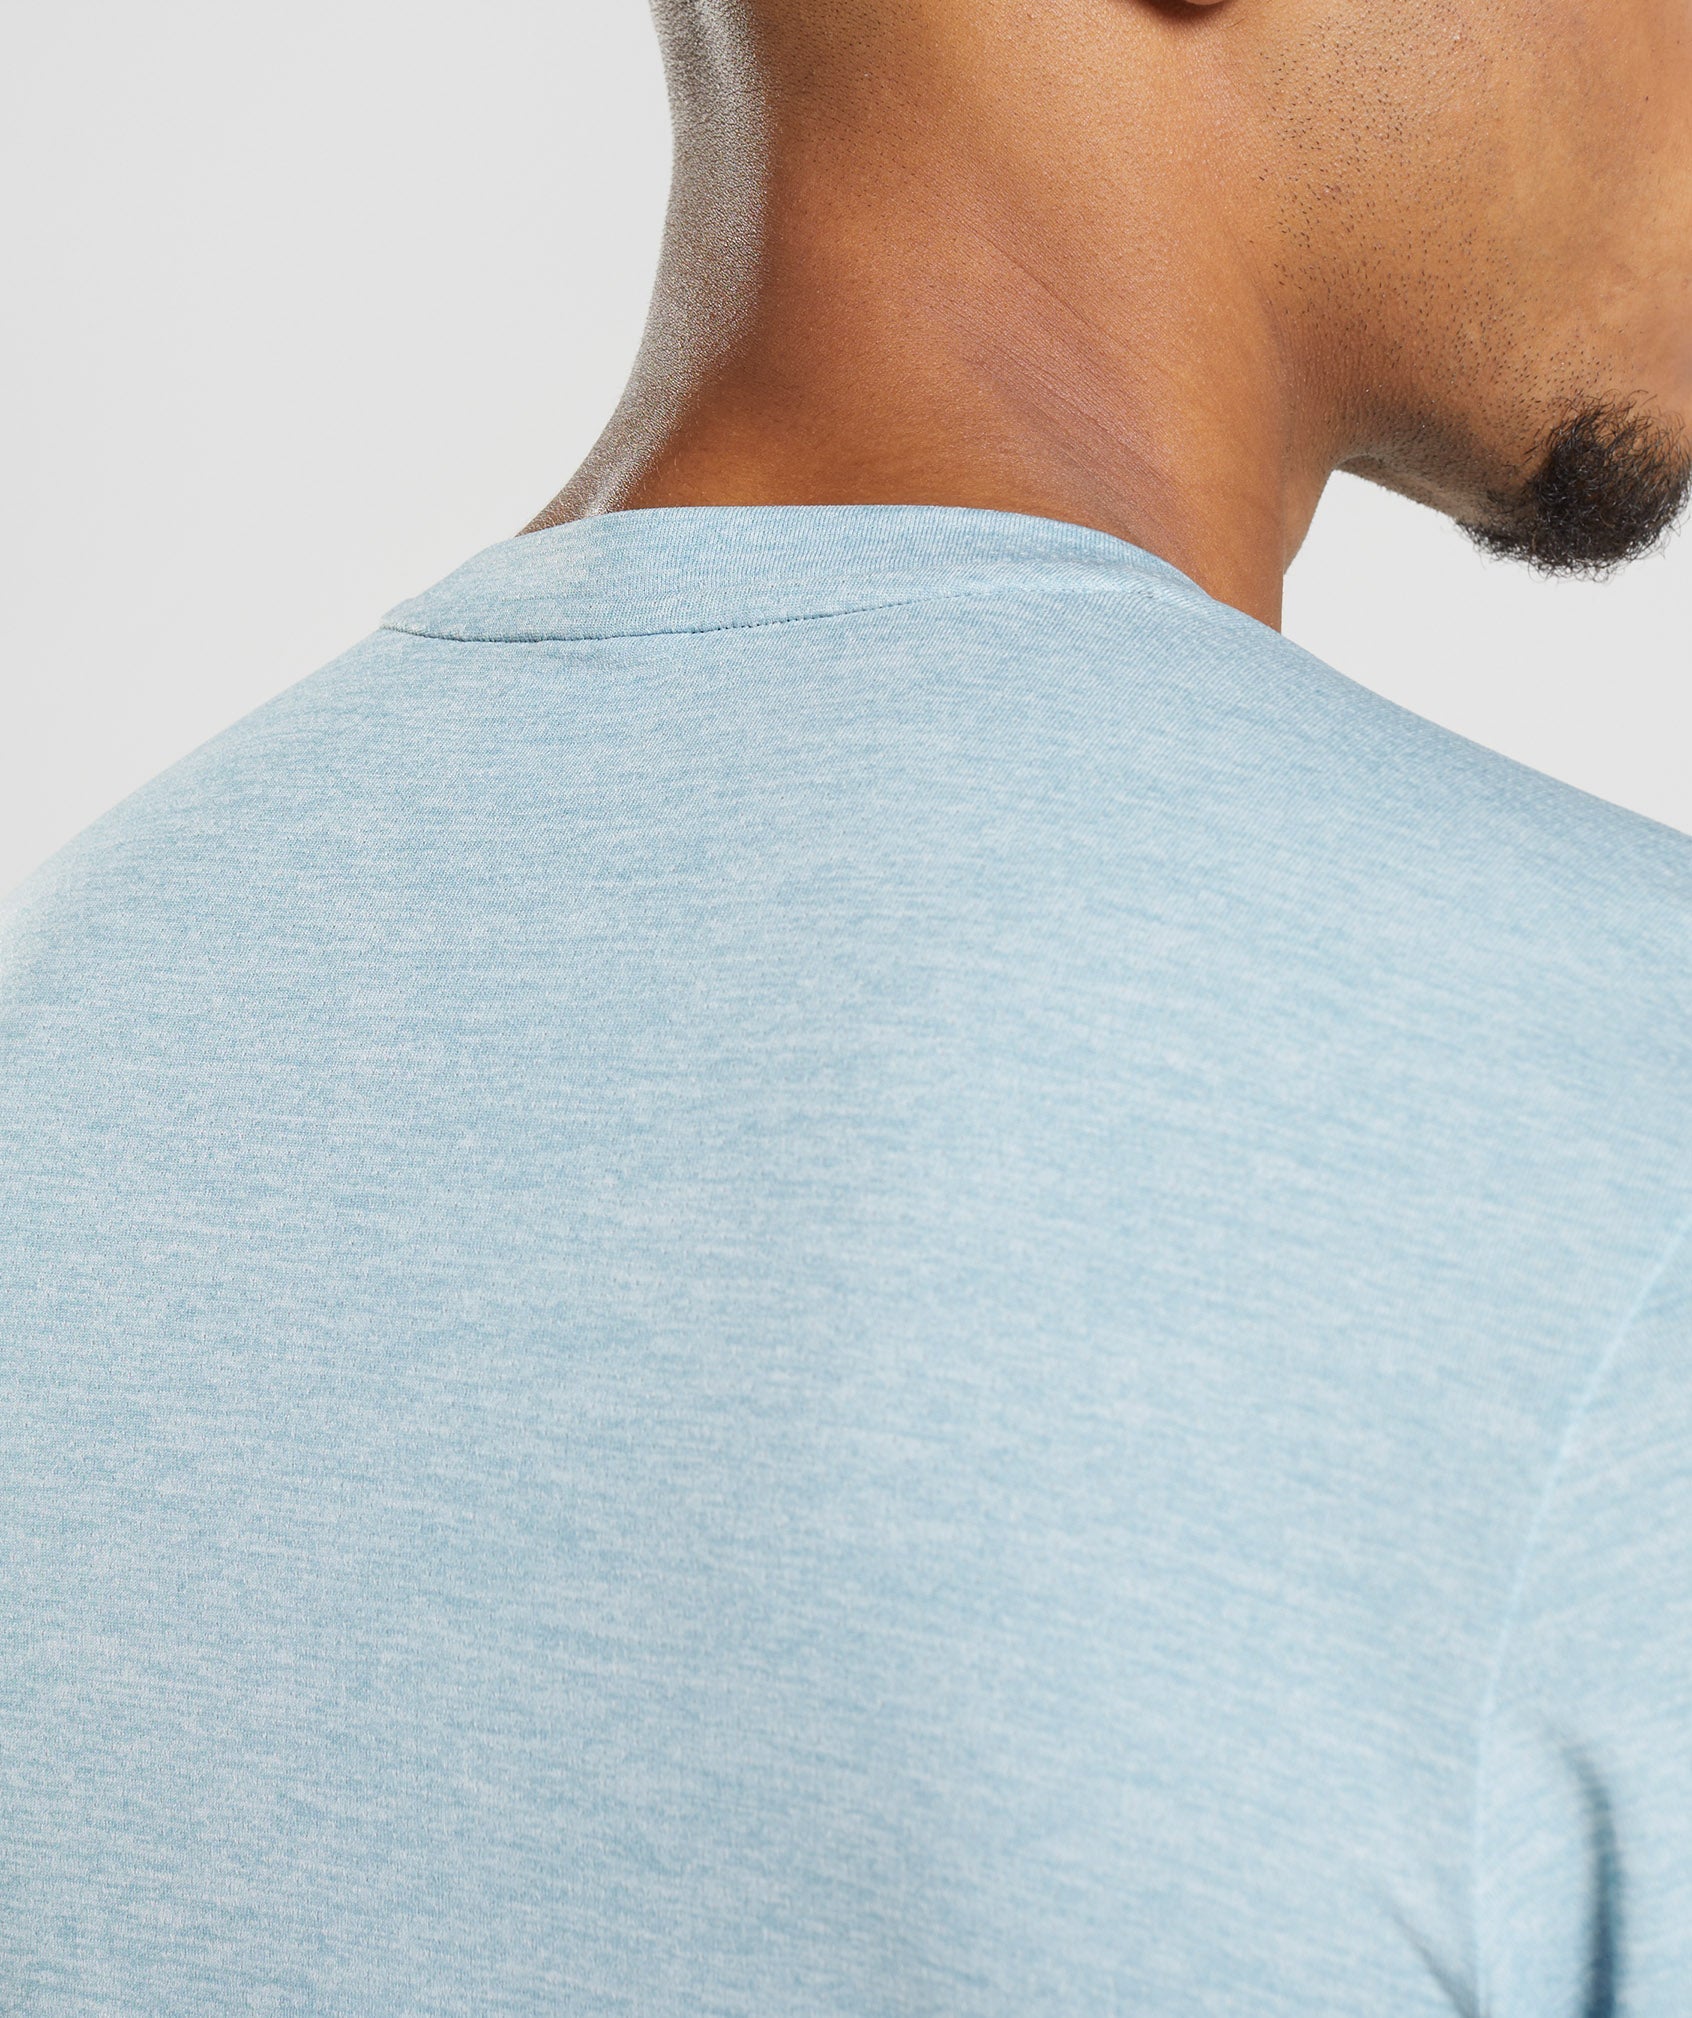 Arrival T-Shirt in Iceberg Blue/Icy Blue Marl - view 6